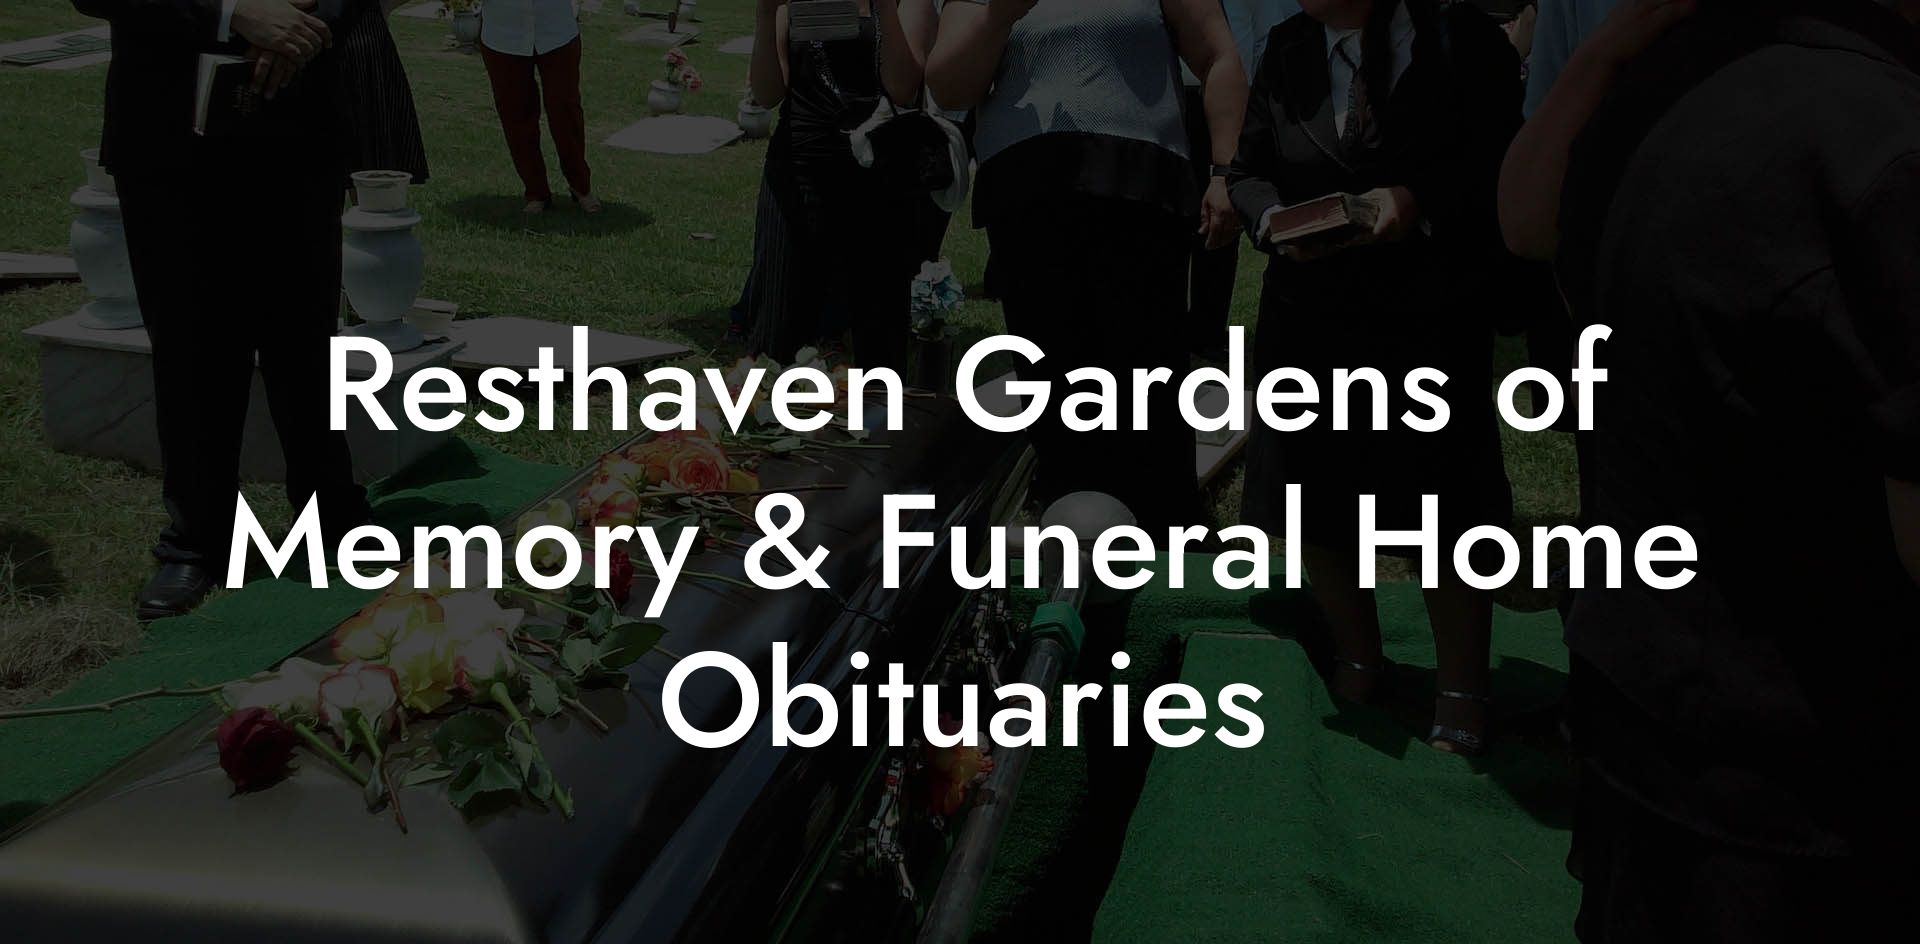 Resthaven Gardens of Memory & Funeral Home Obituaries